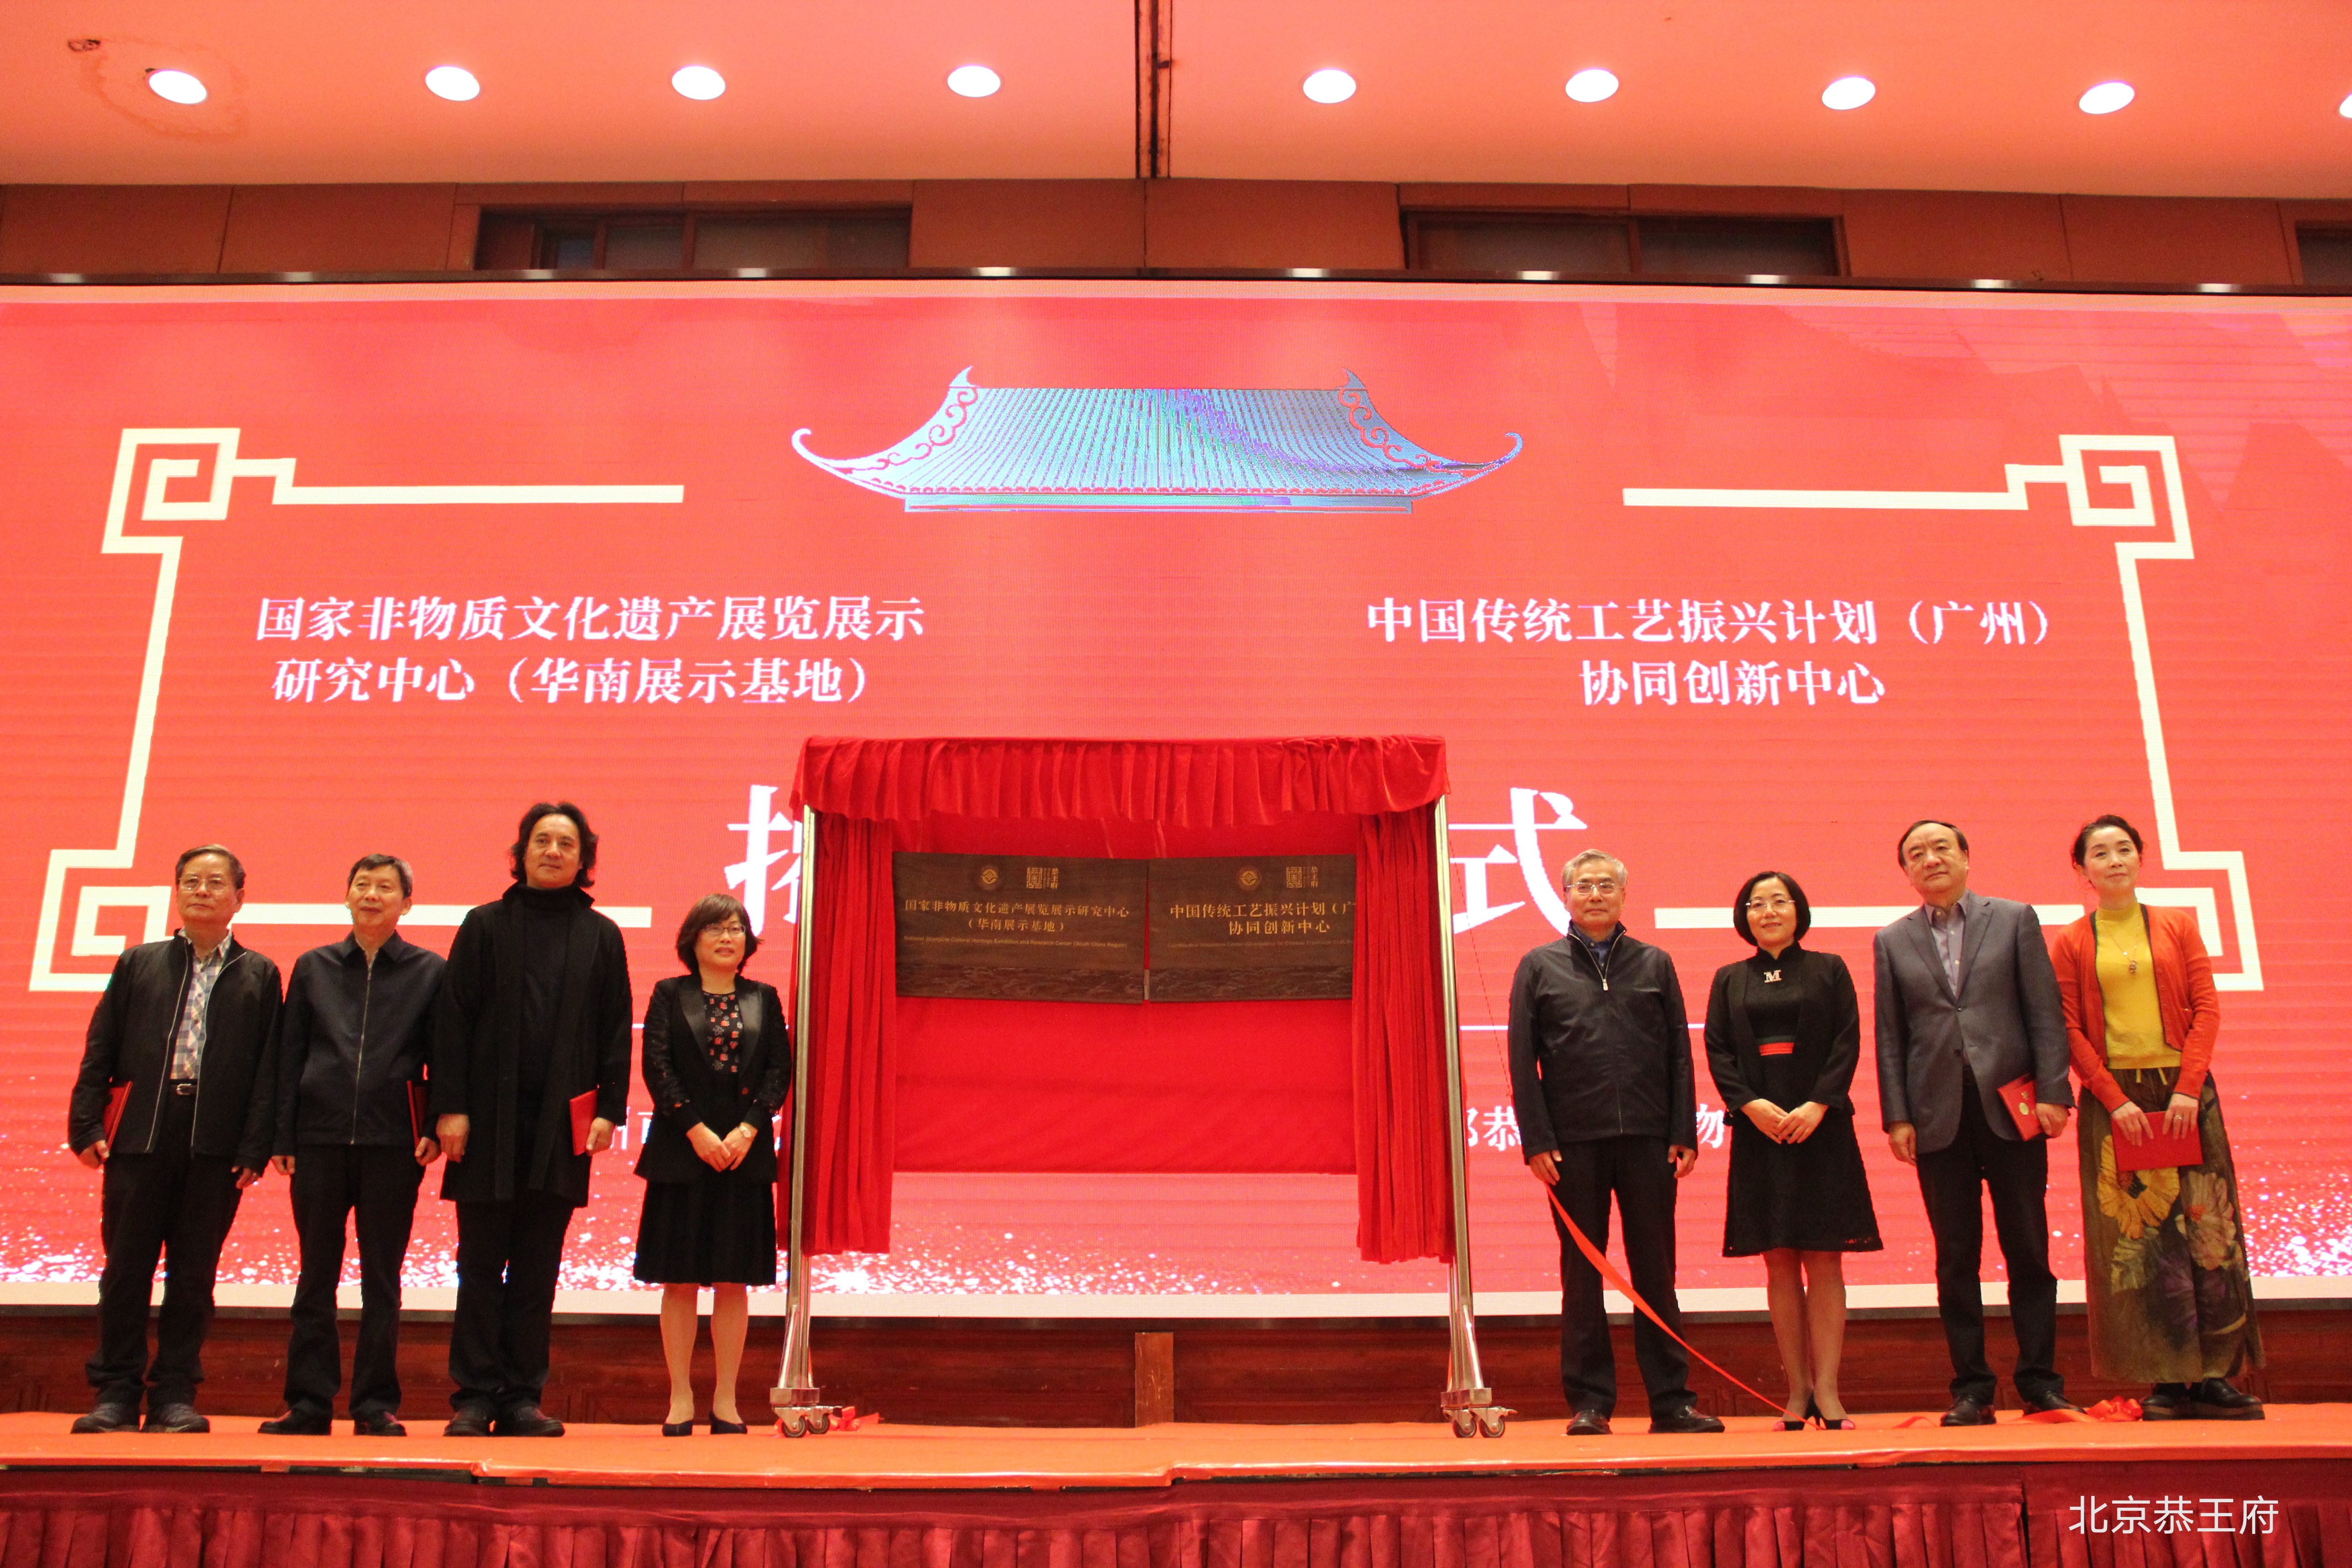 The inauguration ceremony of the "national intangible Cultural Heritage Exhibition and Research Center (South China Exhibition Base) " and the "collaborative innovation center of the Chinese Traditional Craft Revitalization Program (Guangzhou) "